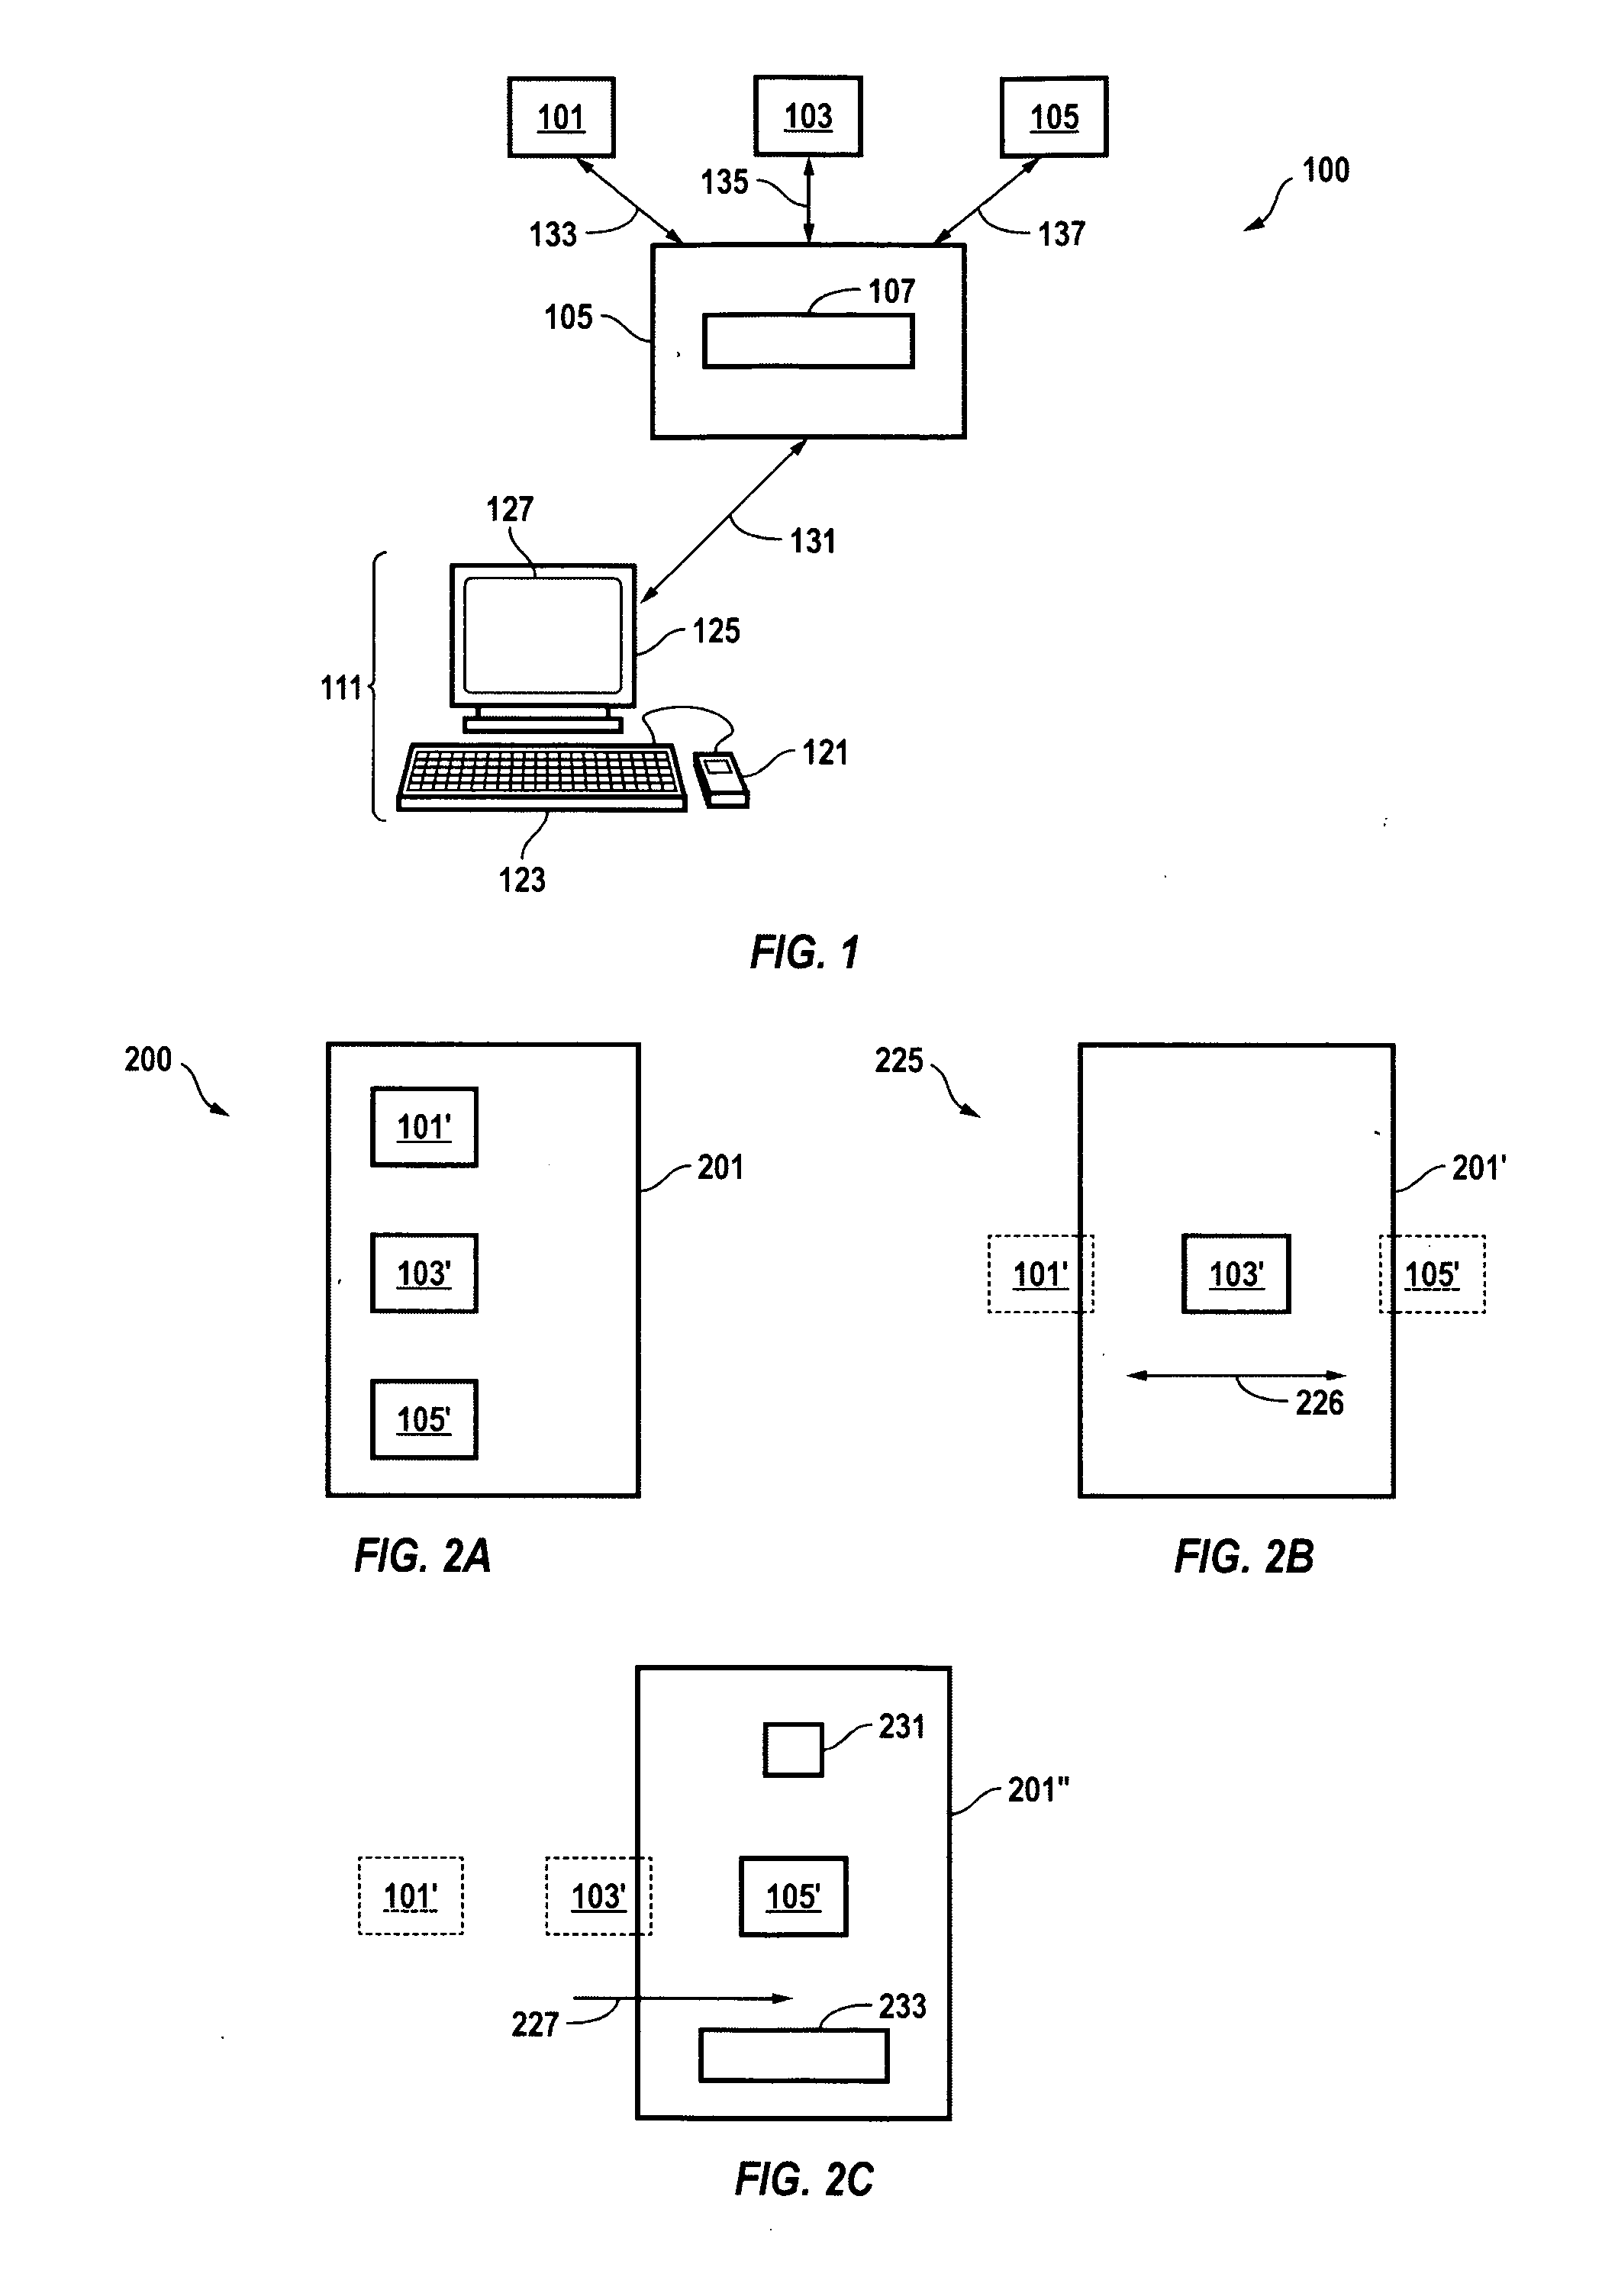 System for managing web-based content data and applications